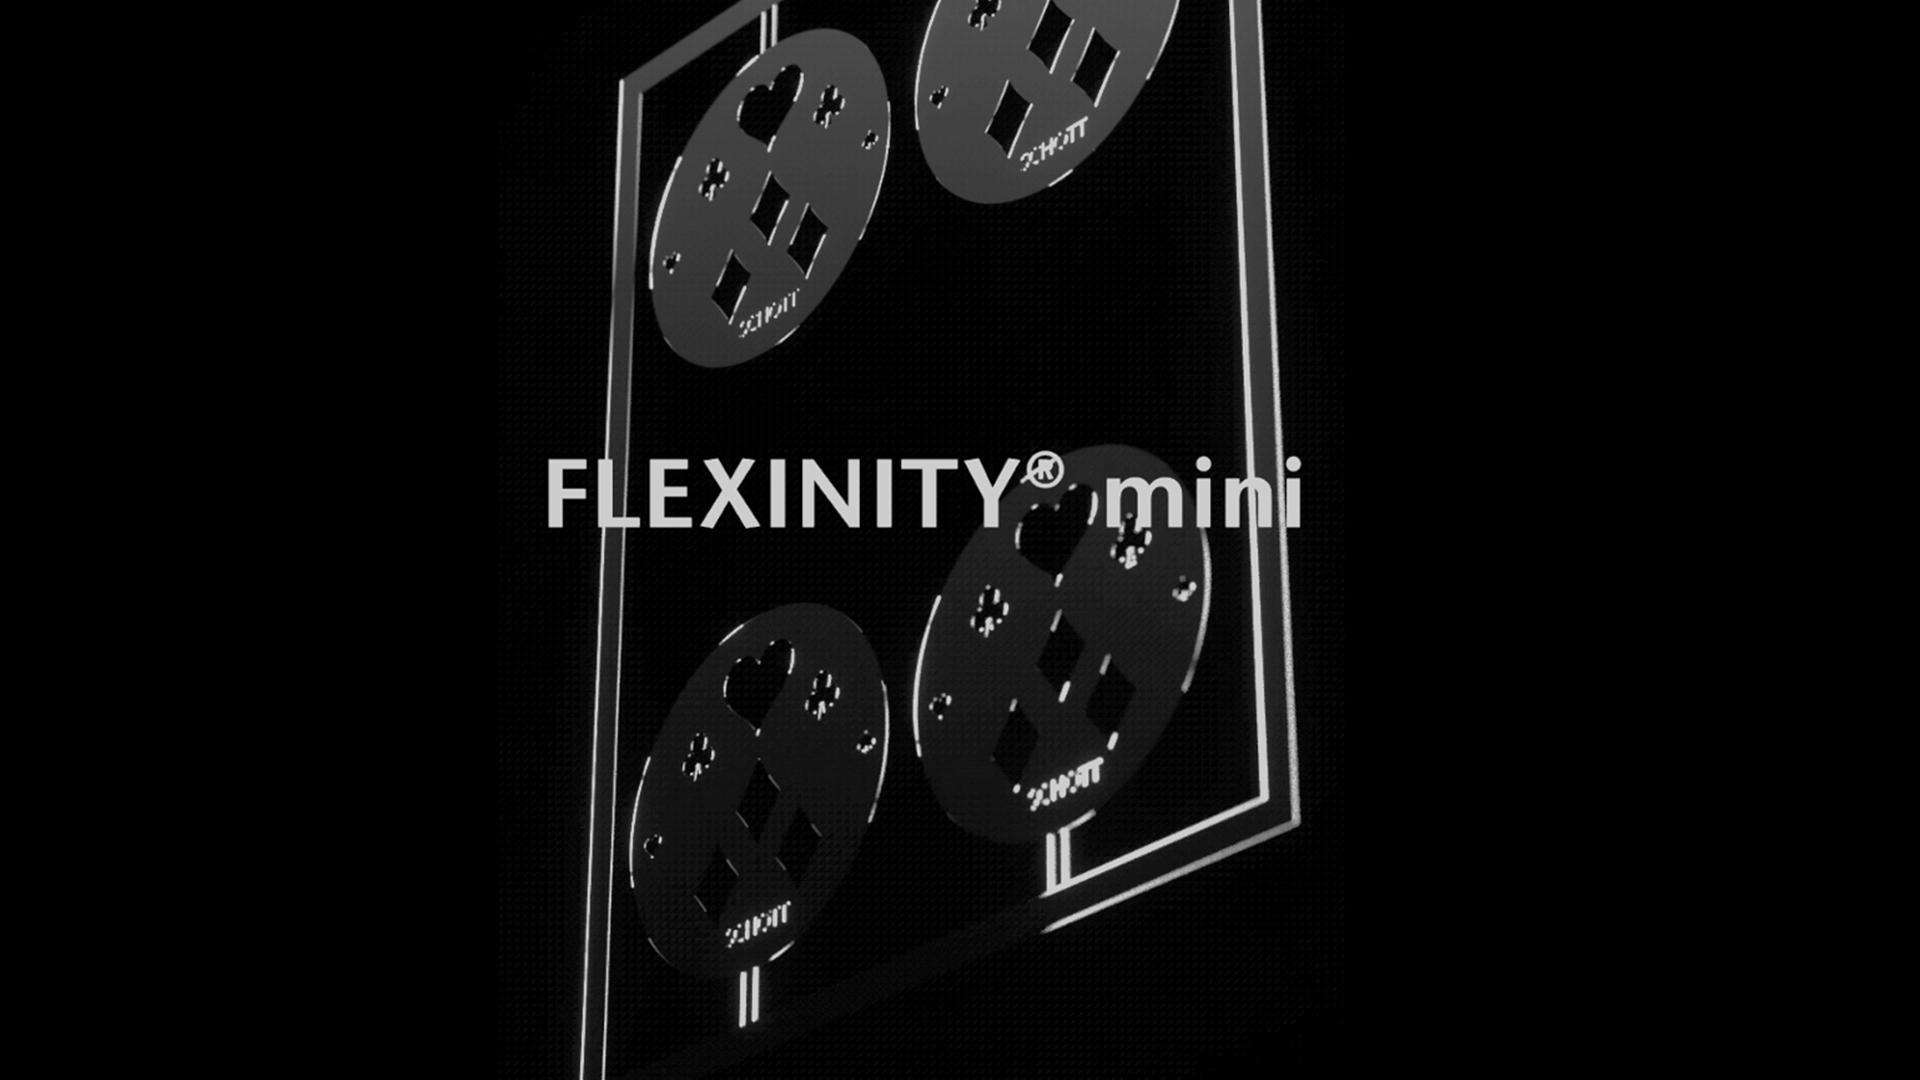 Discover the perfect fit - thanks to FLEXINITY® mini.